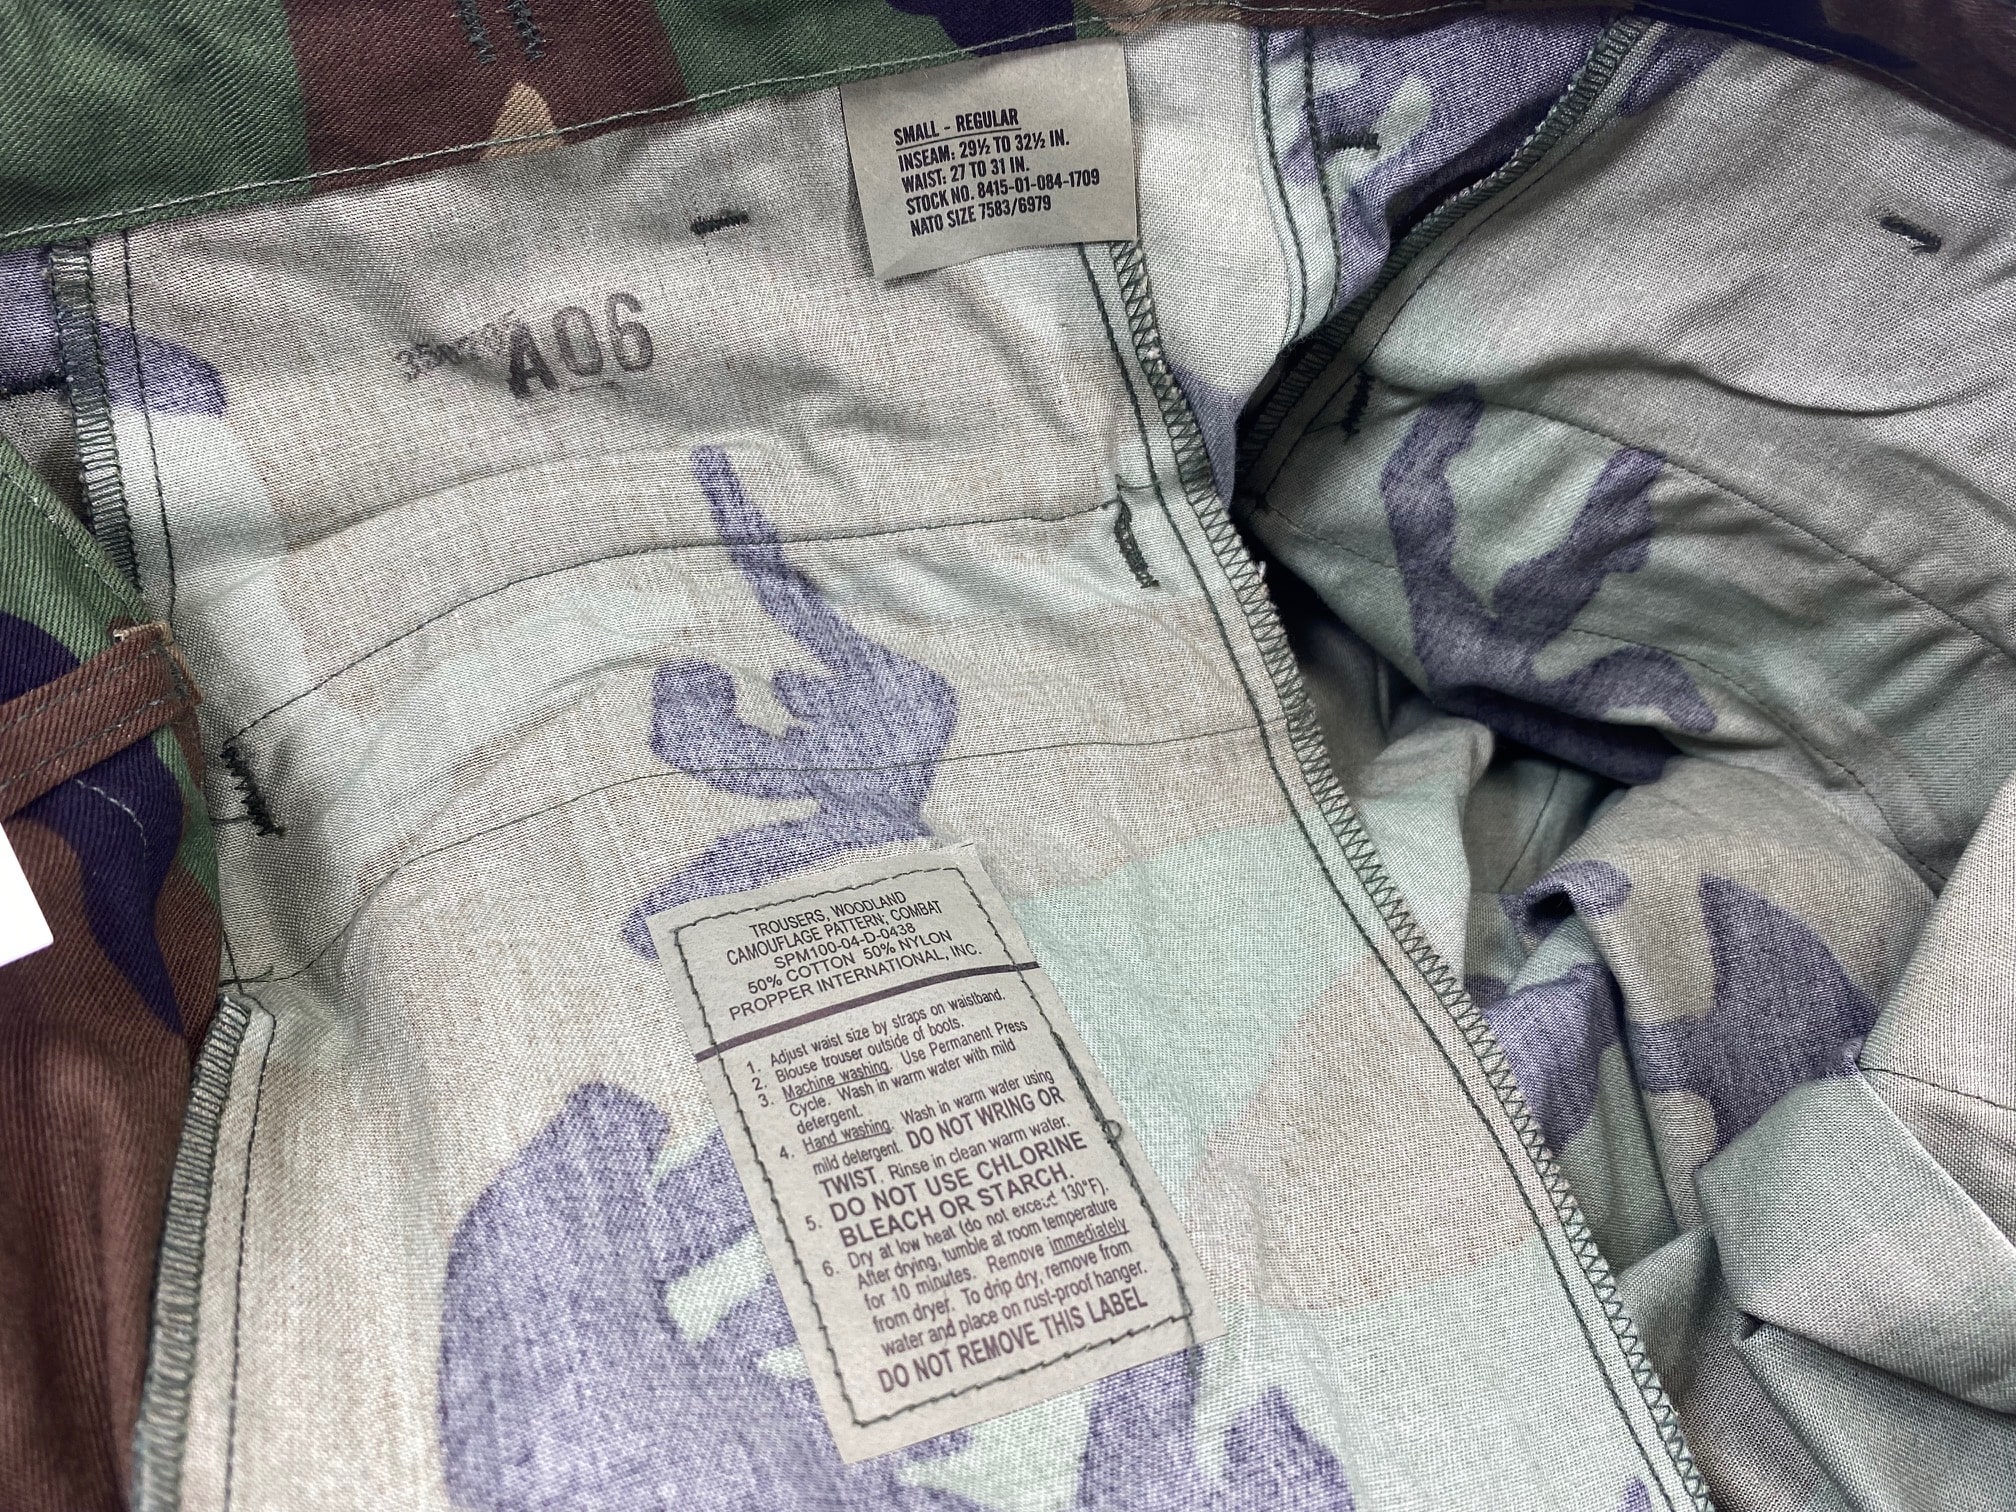 https://www.omahas.com/wp-content/uploads/2022/08/woodland-bdu-trousers-small-reg-issue-nyco-clg3033-5.jpg